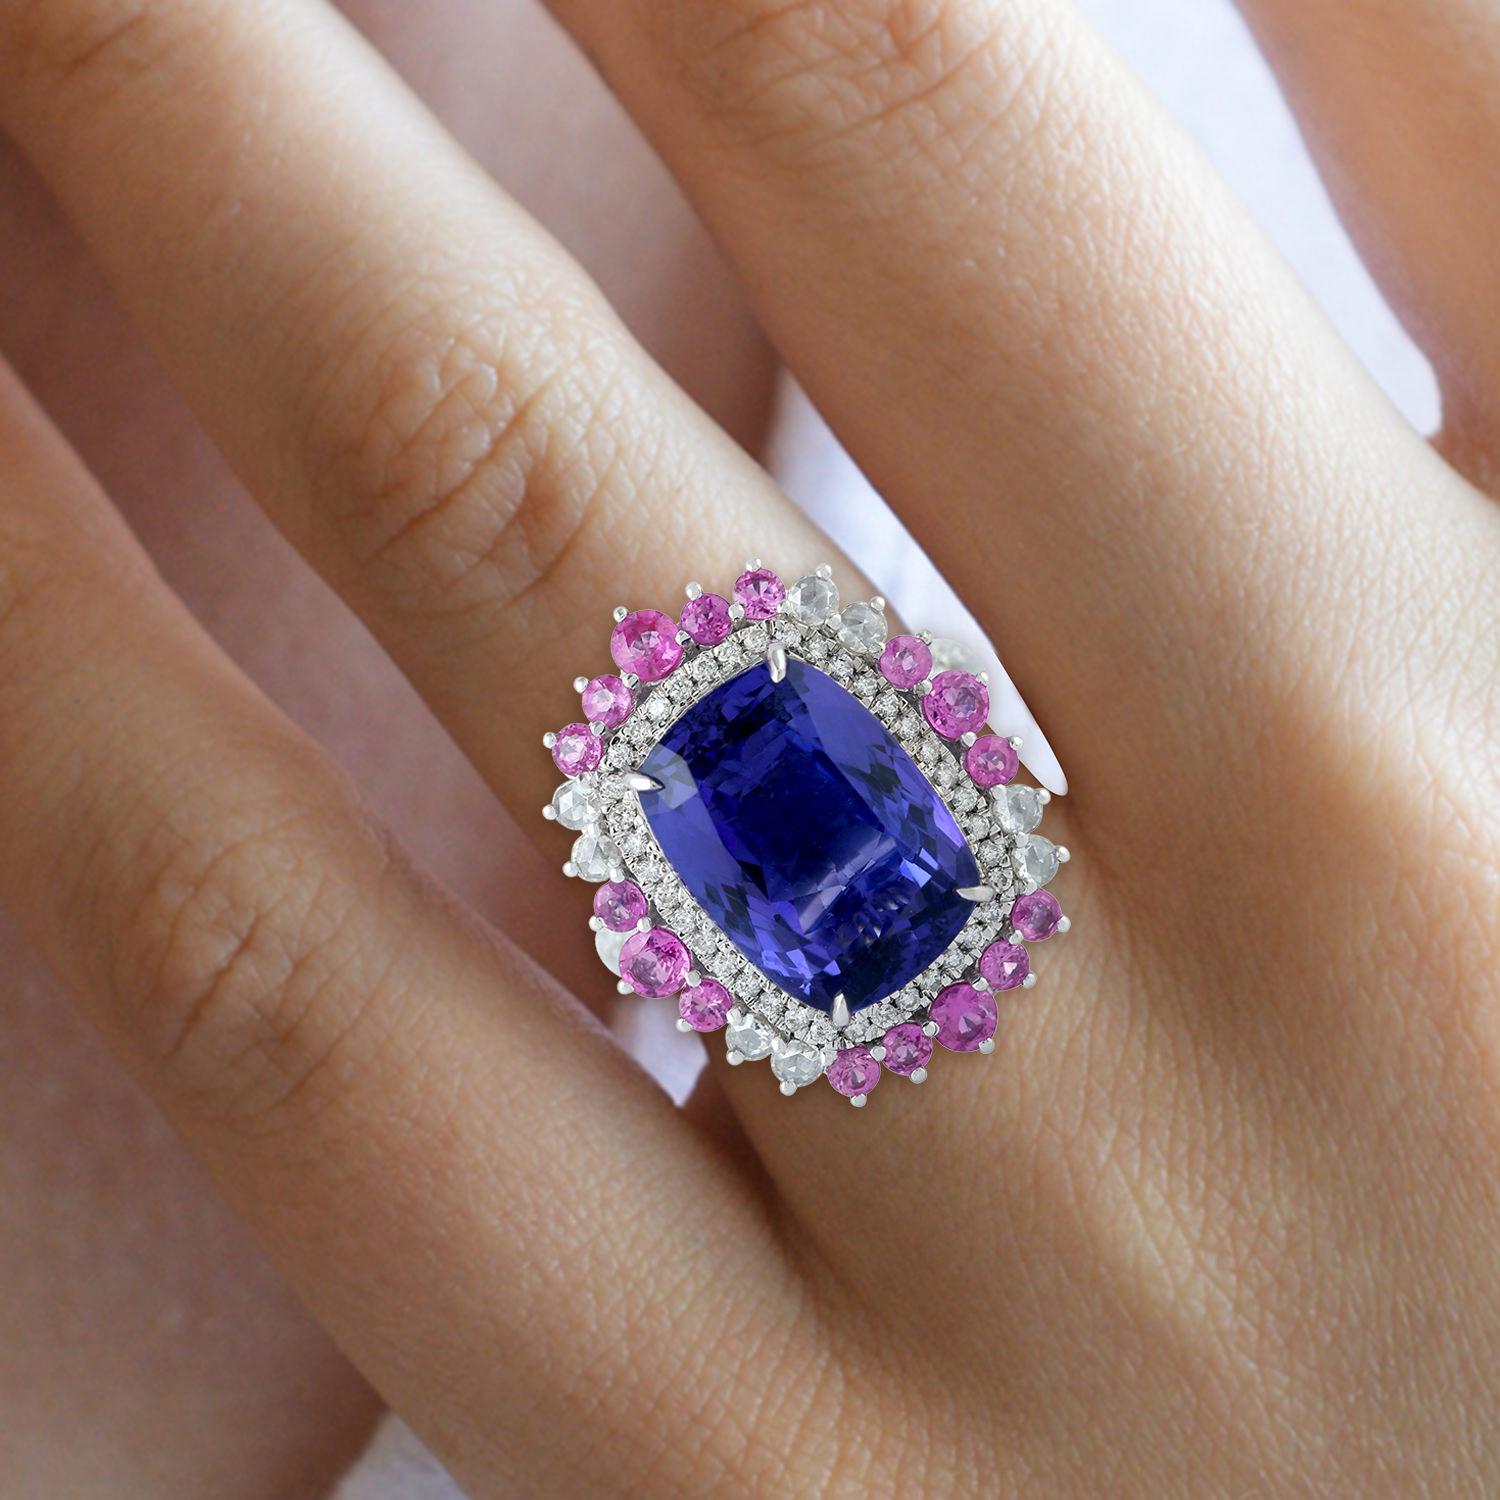 This stunning ring has been meticulously crafted from 18-karat gold. It is hand set with 9.81 carats tanzanite, 1.31 carats sapphire and illuminated with .91 carats of sparkling diamonds. 

The ring is a size 7 and may be resized to larger or